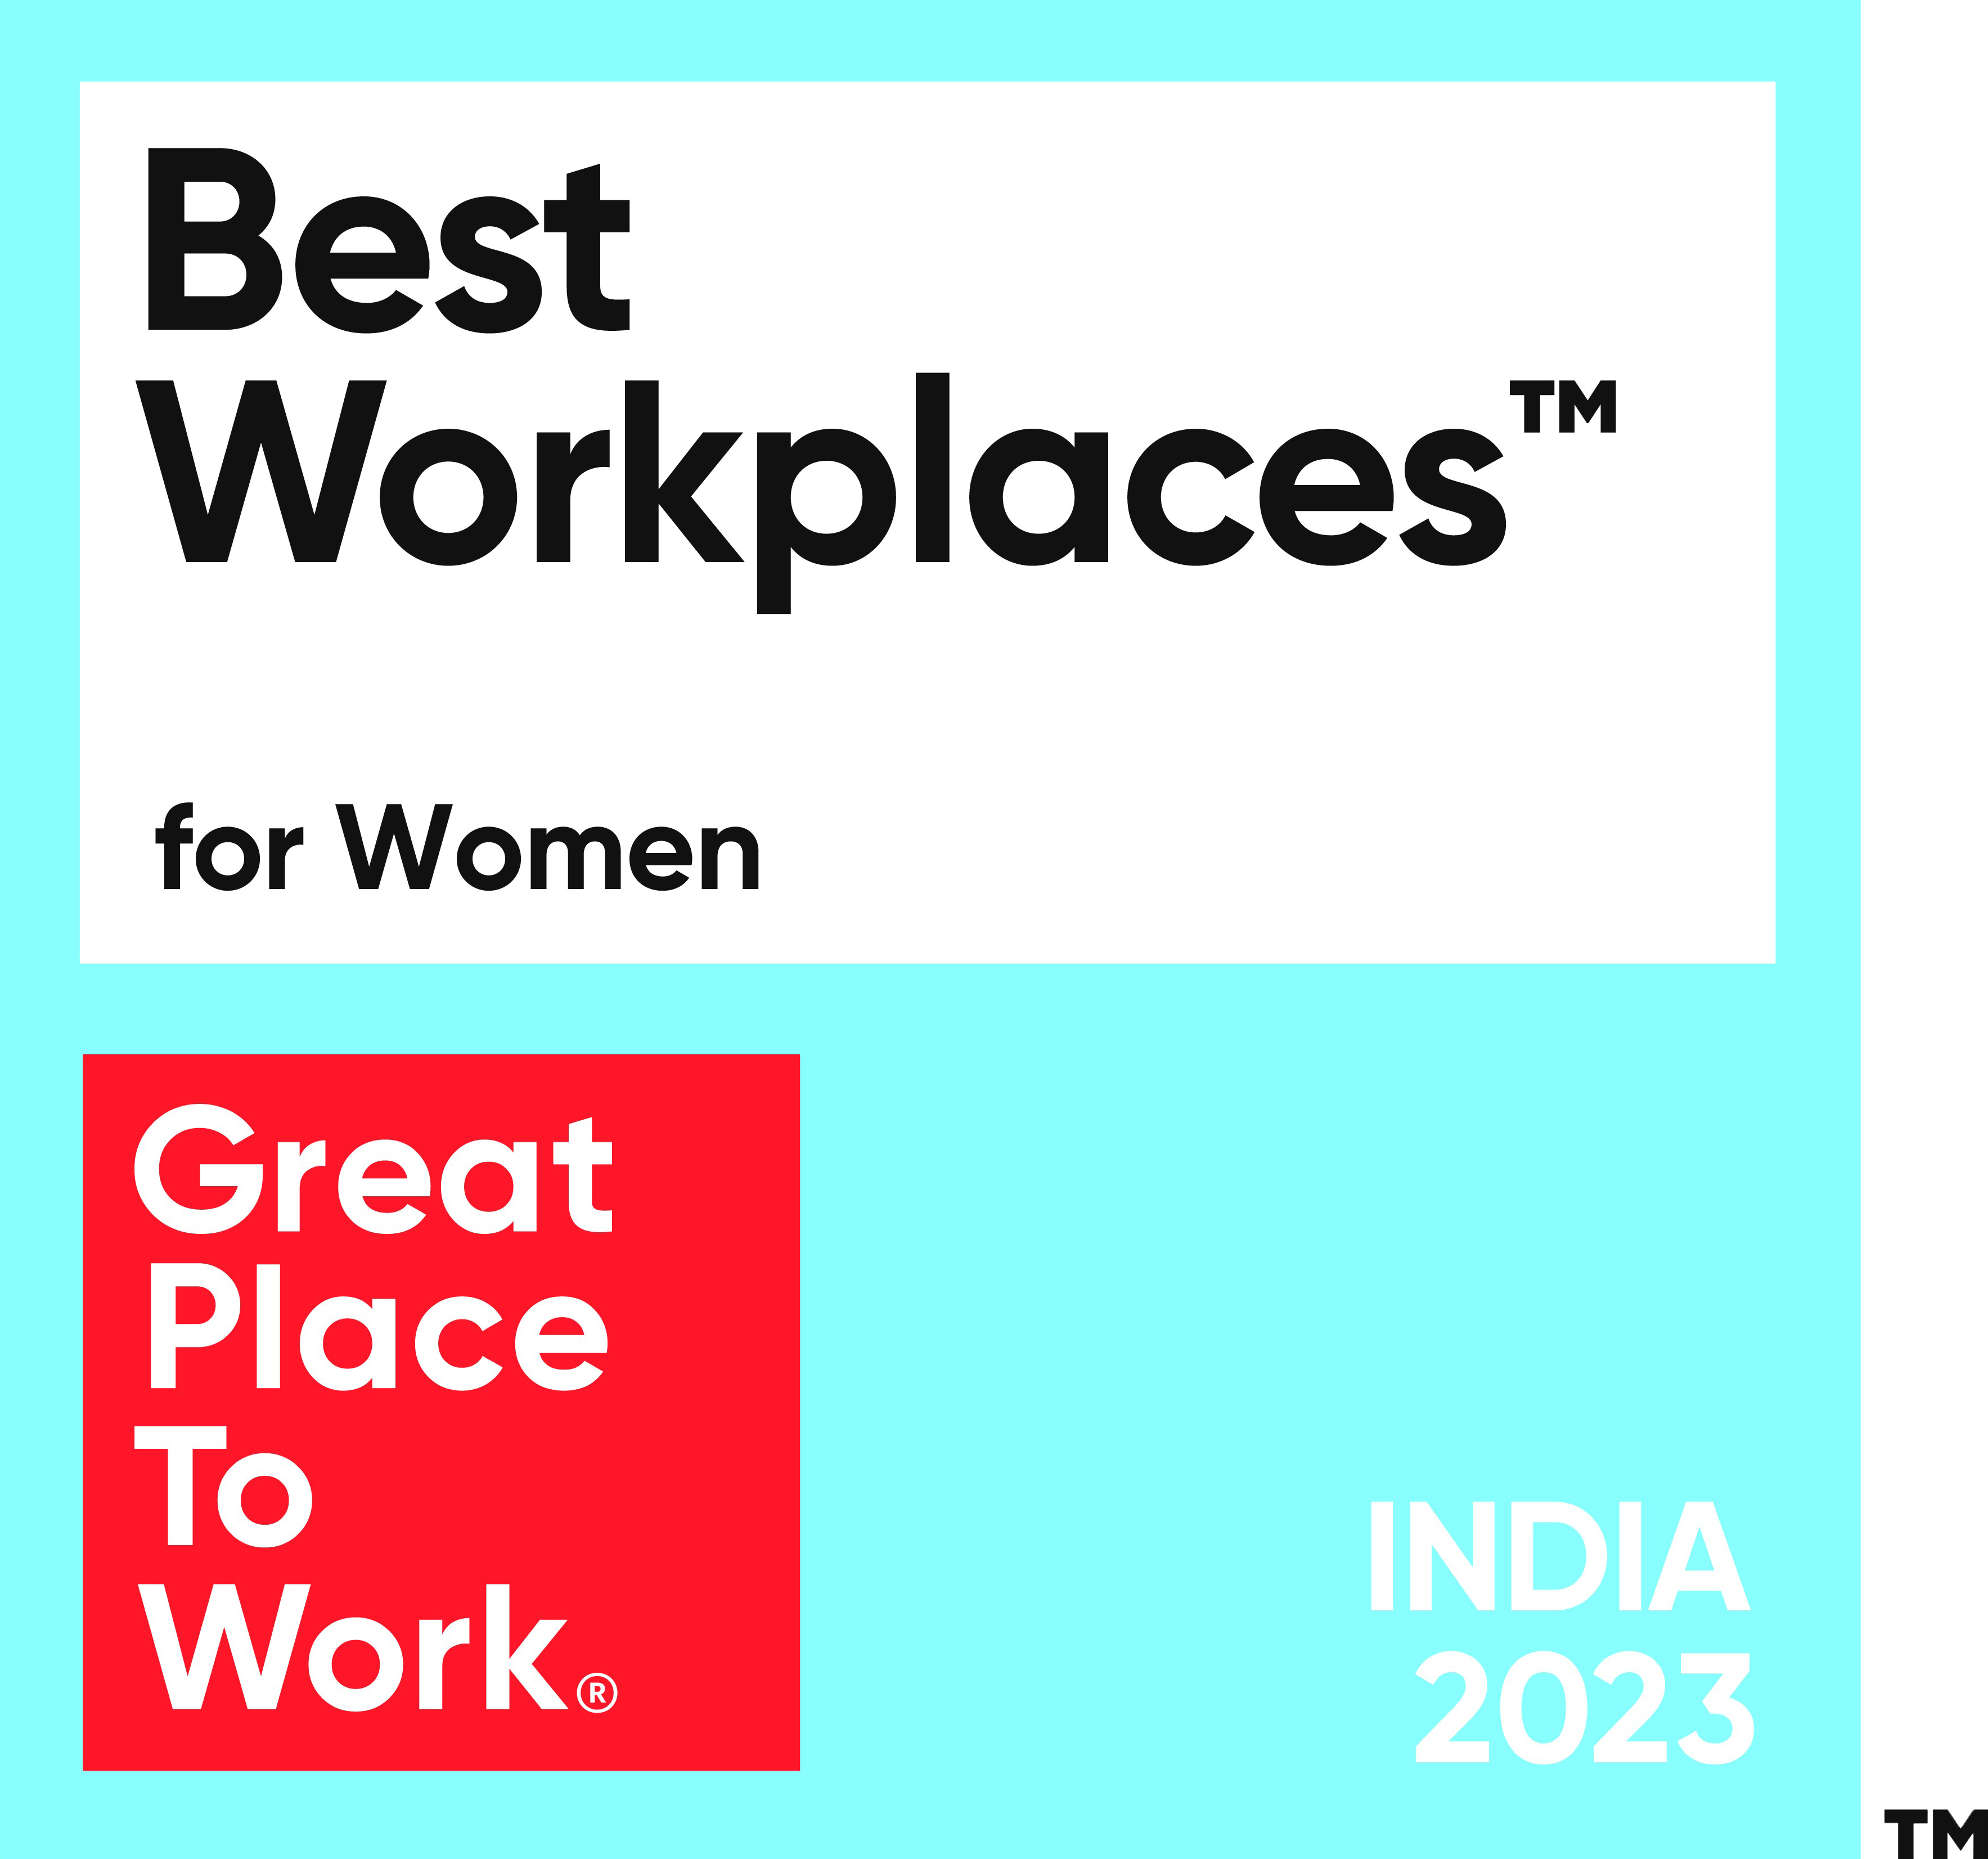 Best Workplaces for Women - India 2023